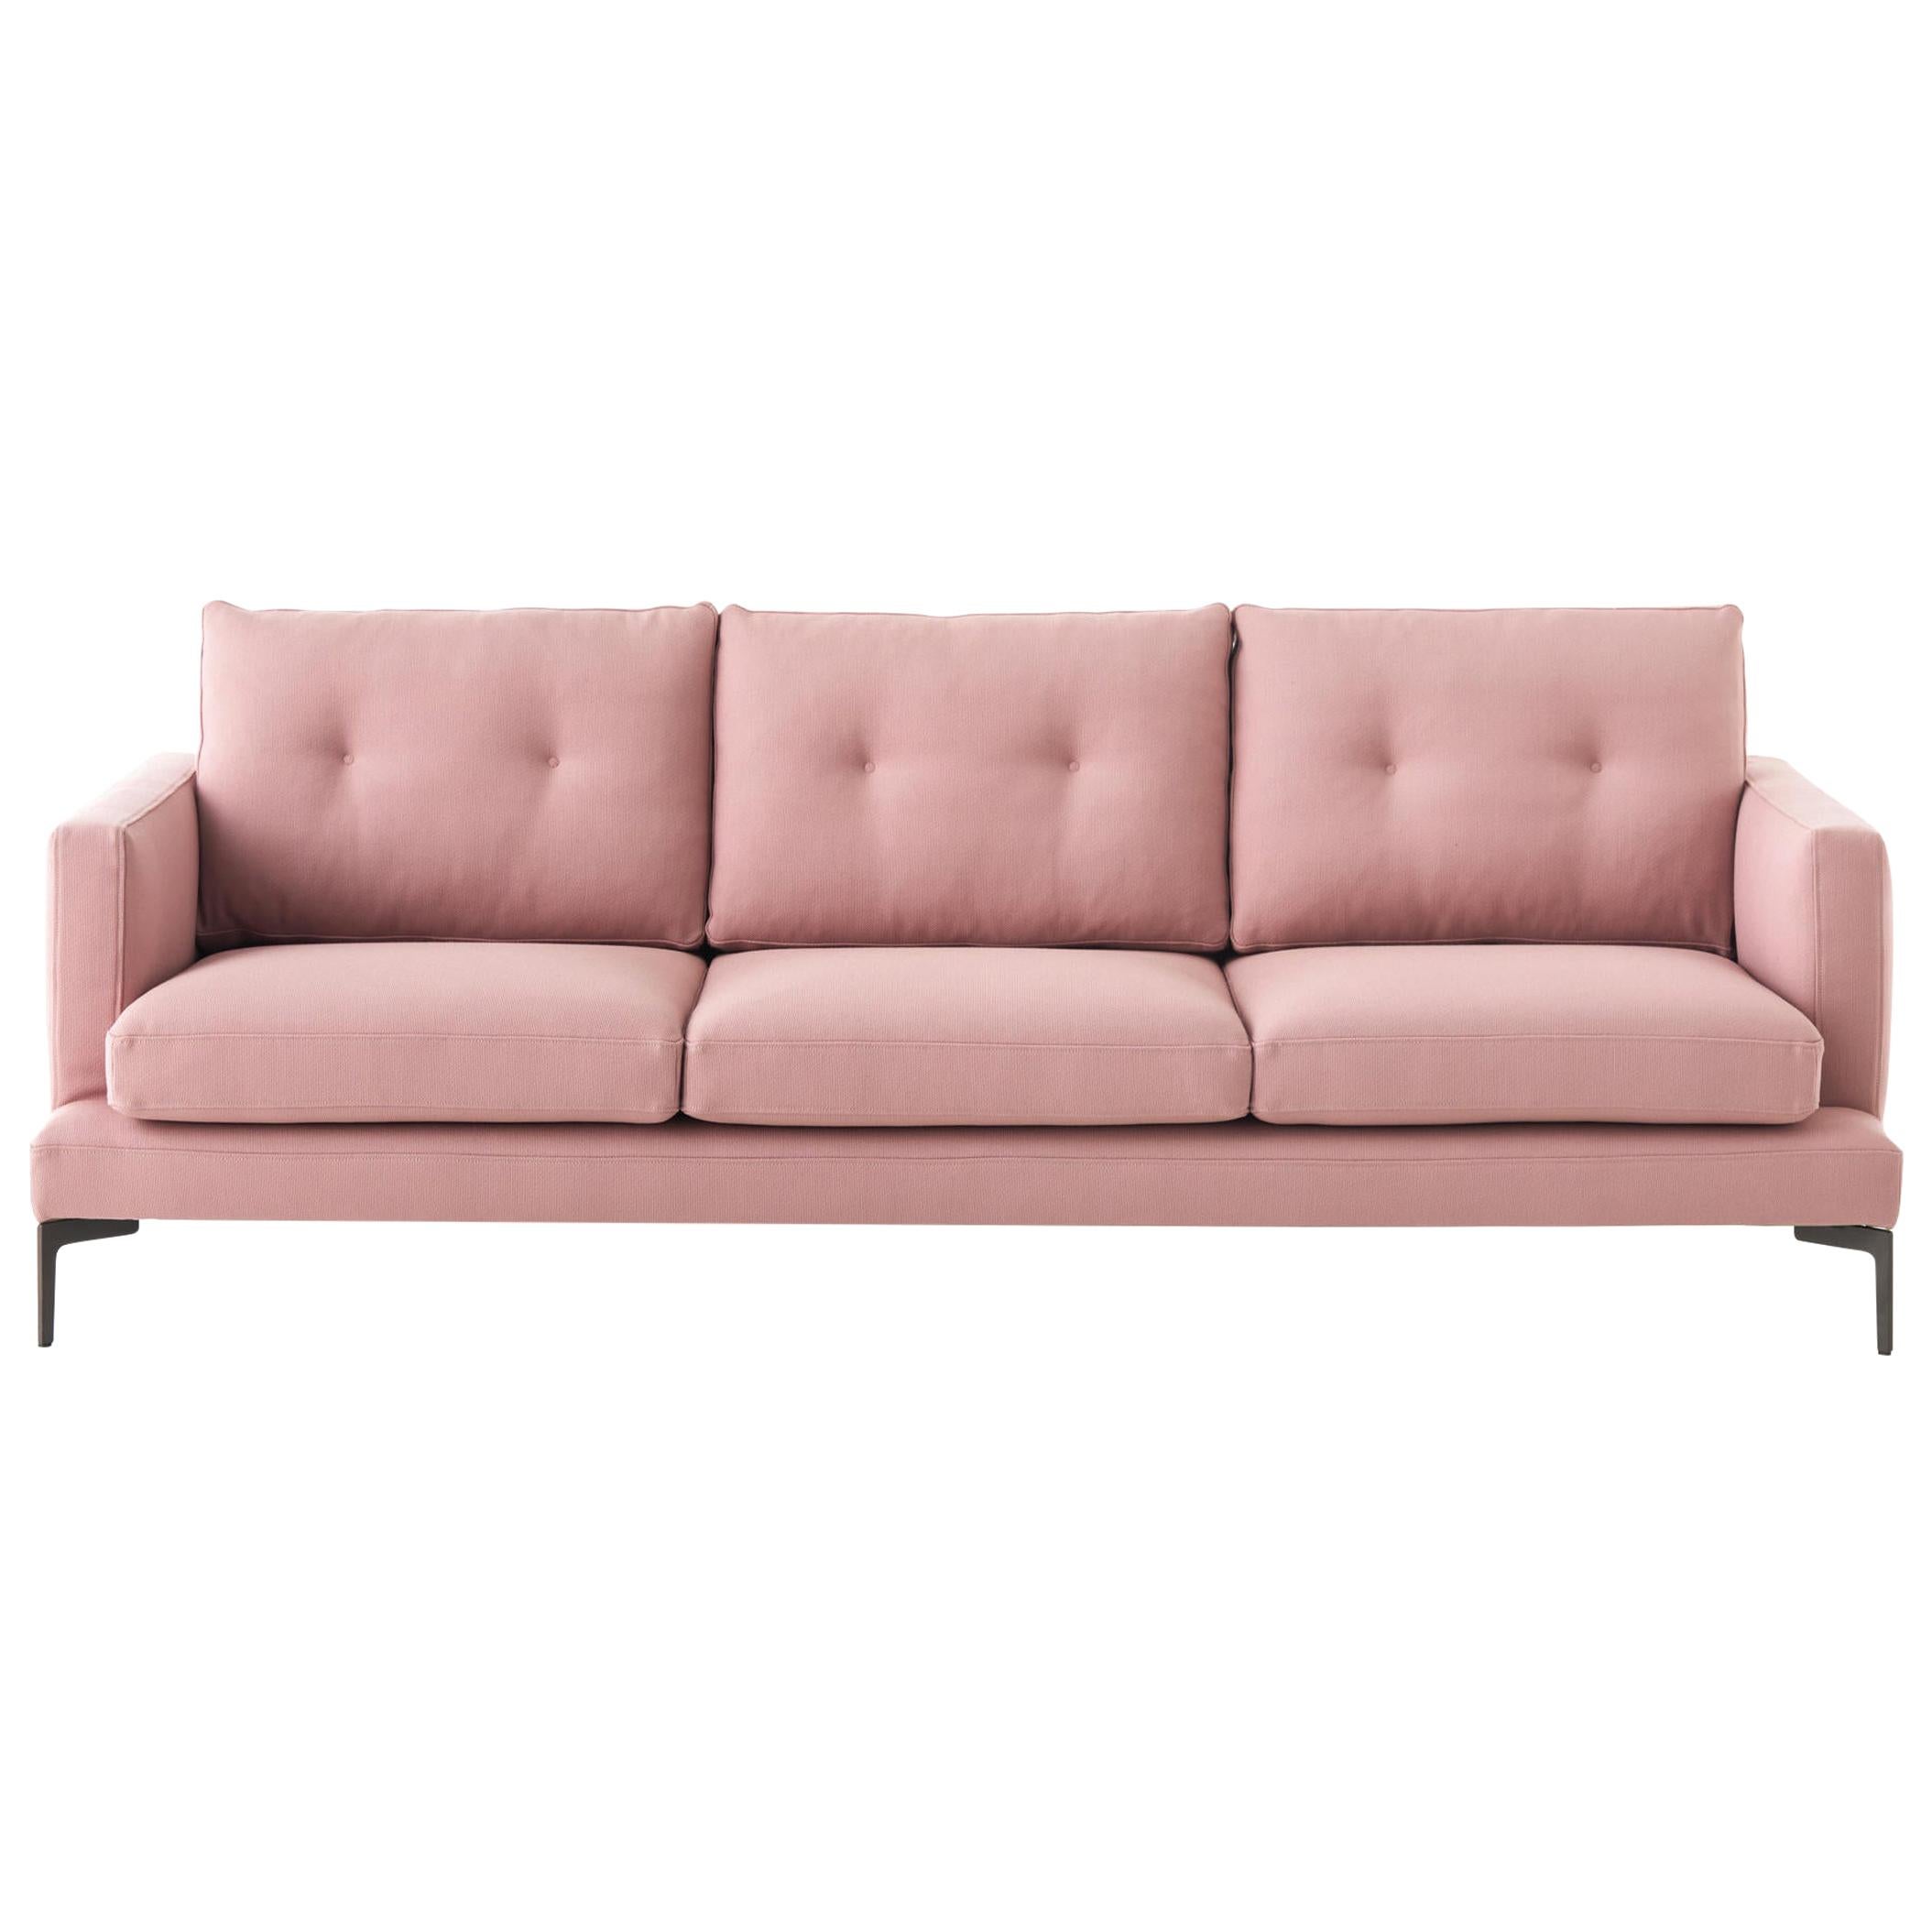 Essentiel Pink Sofa, Designed by Sergio Bicego, Made in Italy